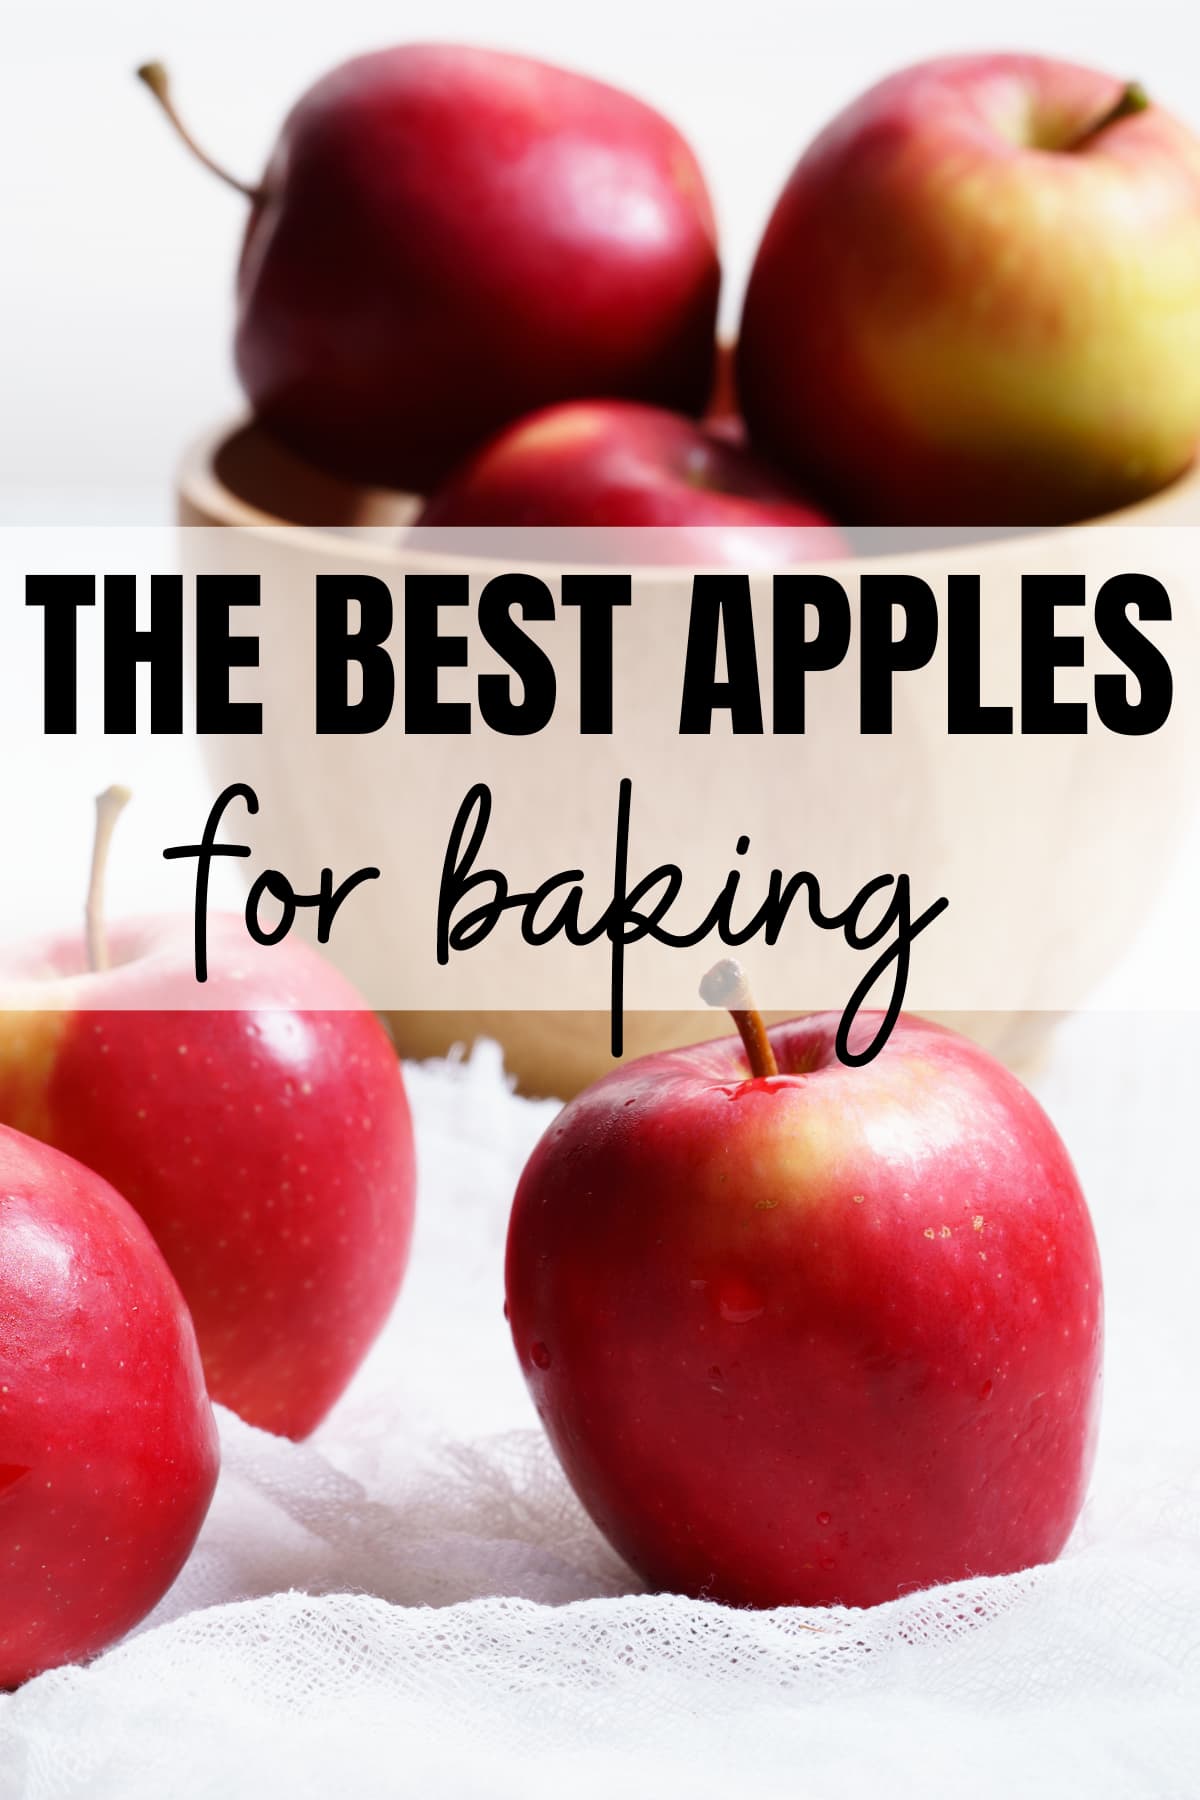 Apples for baking on a counter with text overlay.